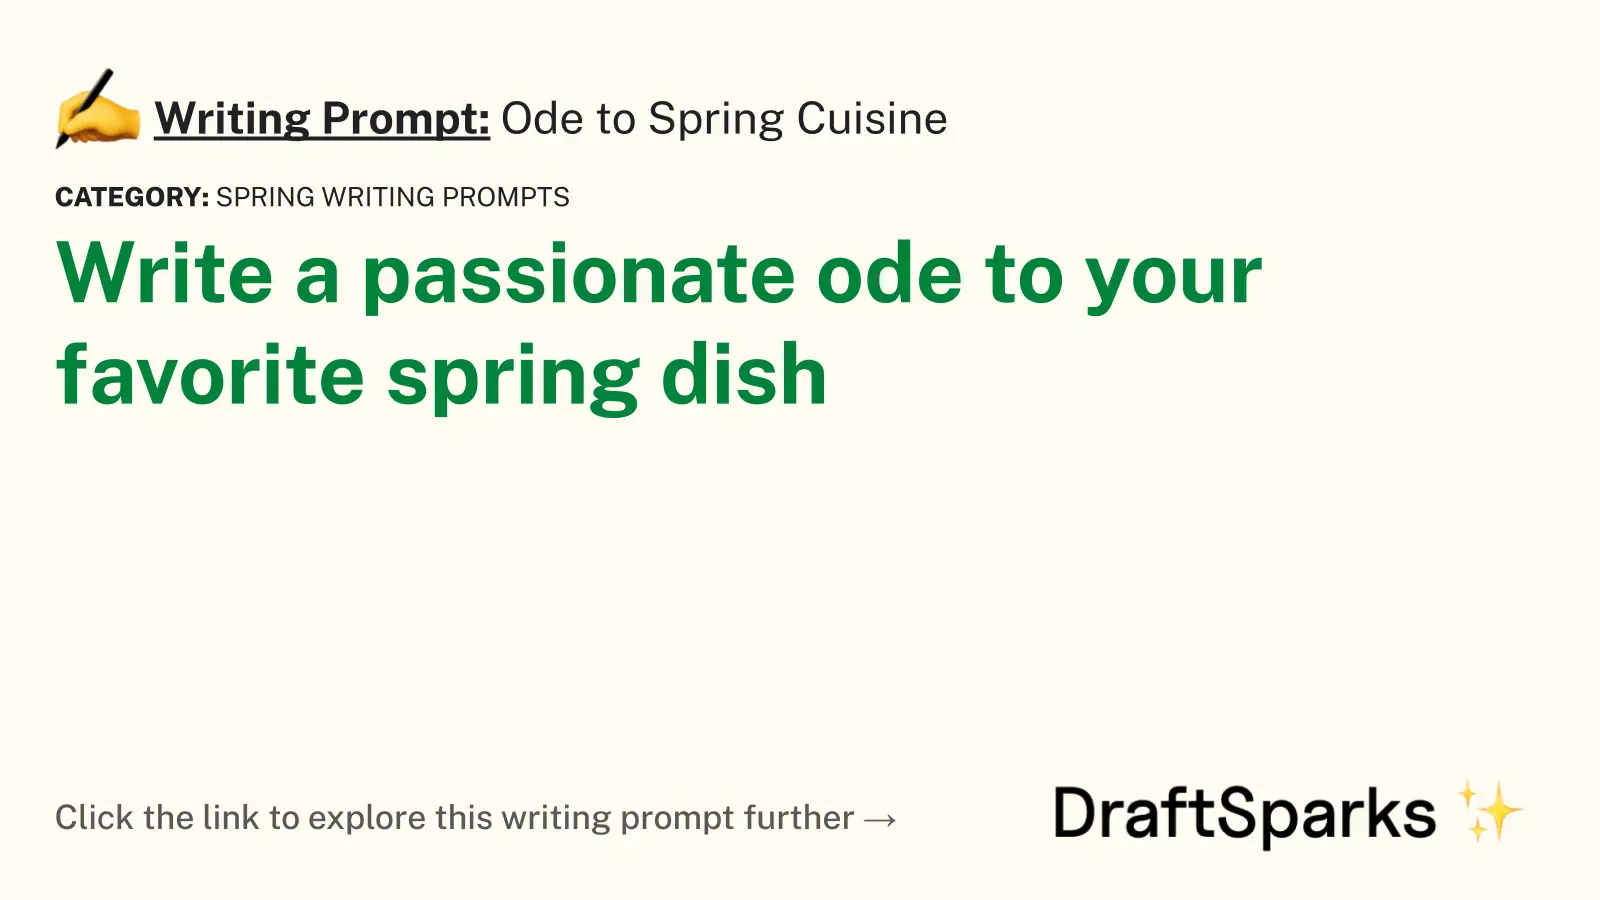 Ode to Spring Cuisine